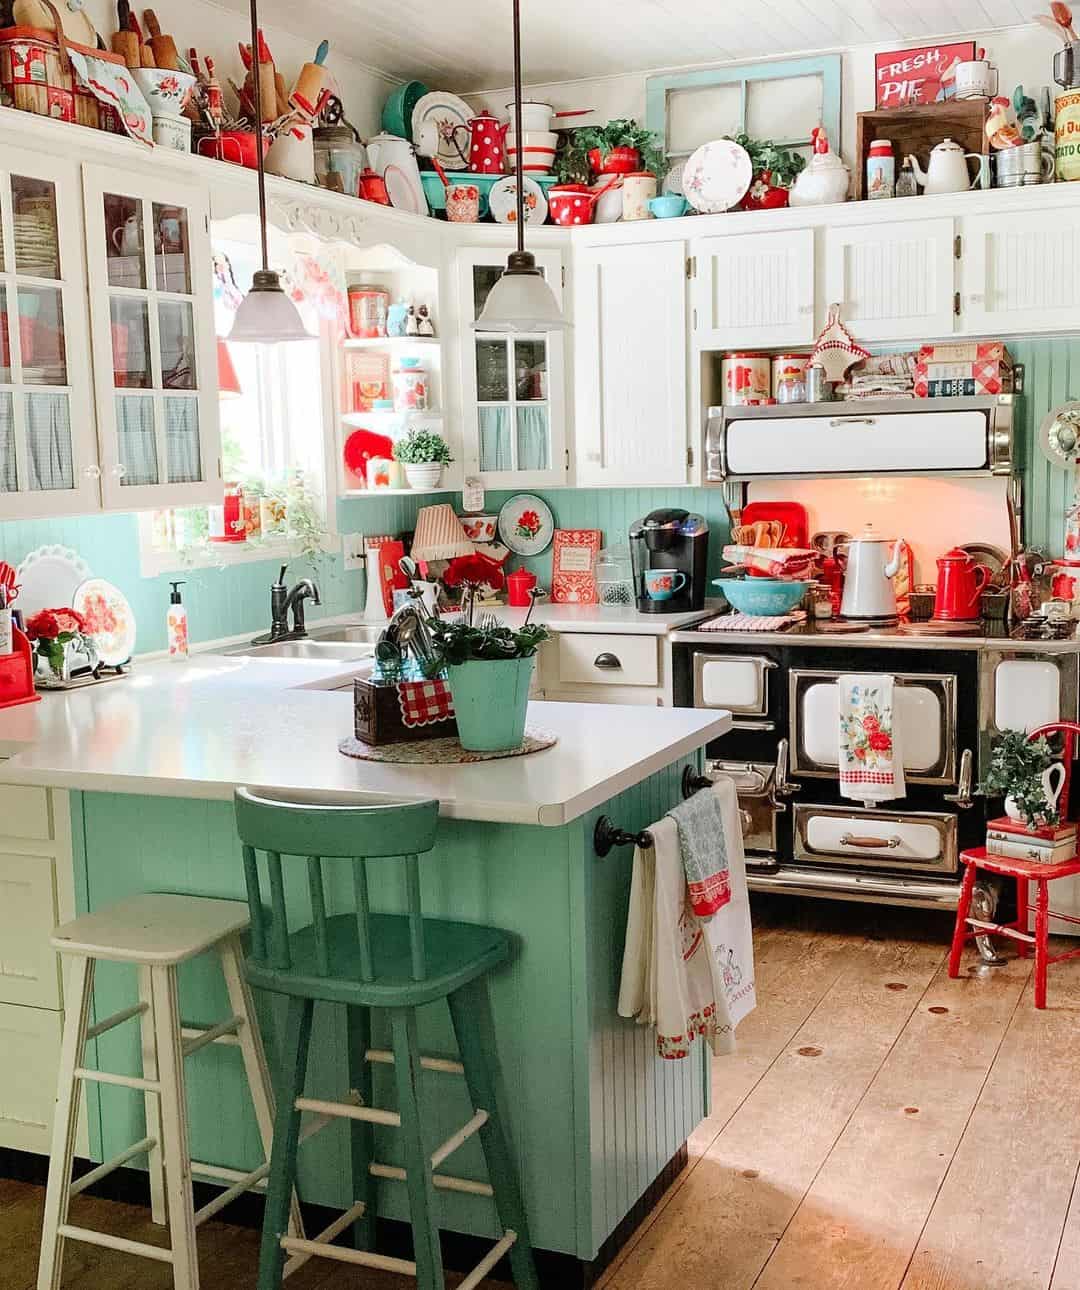 https://www.soulandlane.com/wp-content/uploads/2023/03/Kitchen-With-Red-and-Mint-Green-Kitchen-Decor.jpg